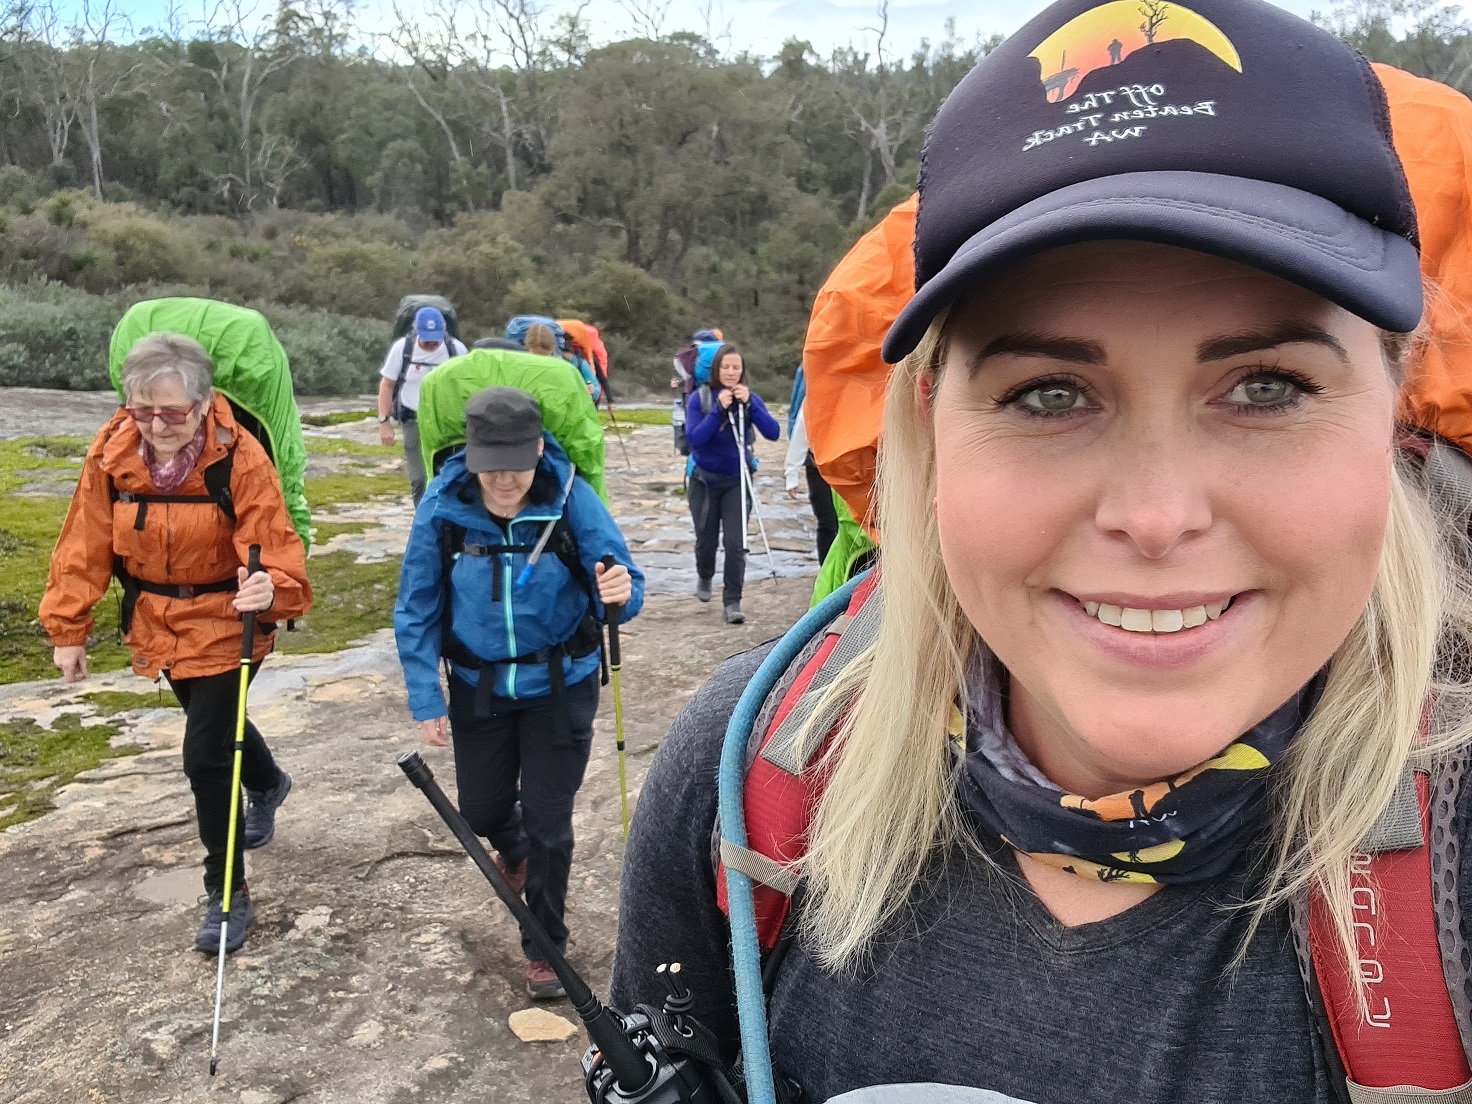 Putting Myself First – Hiking for Resilience